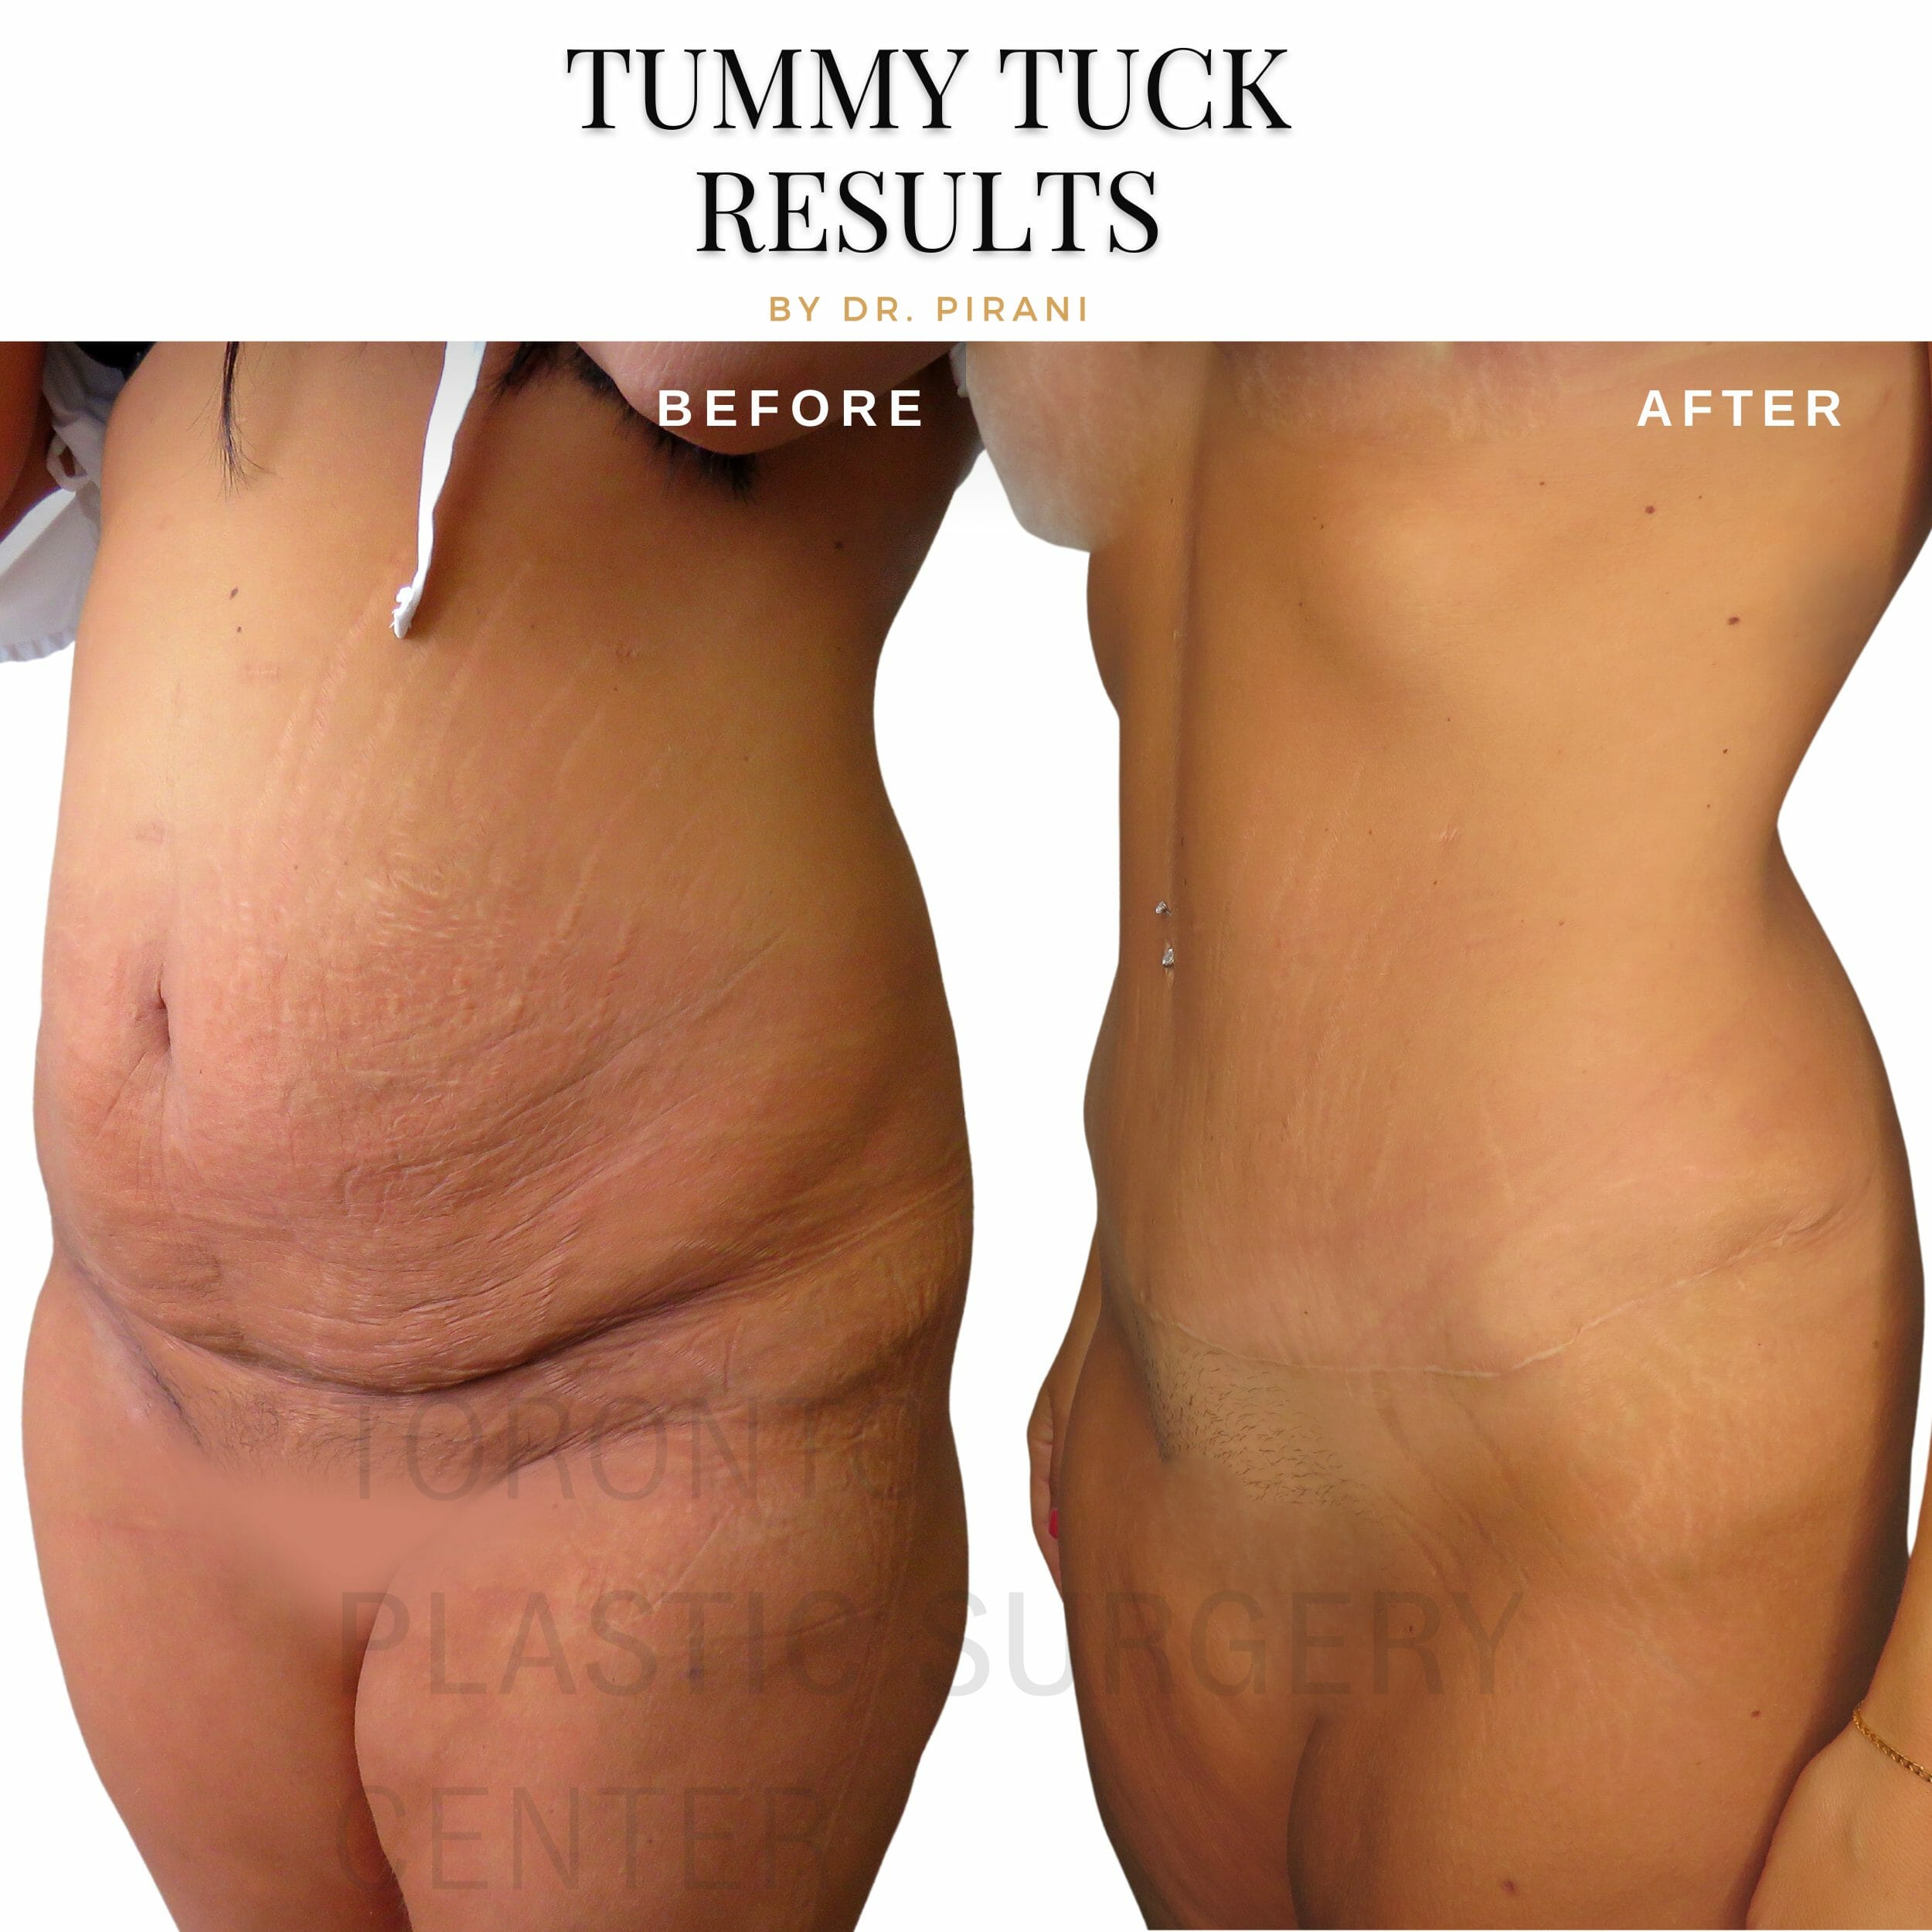 Benefits of post-surgical girdles after abdominoplasty or